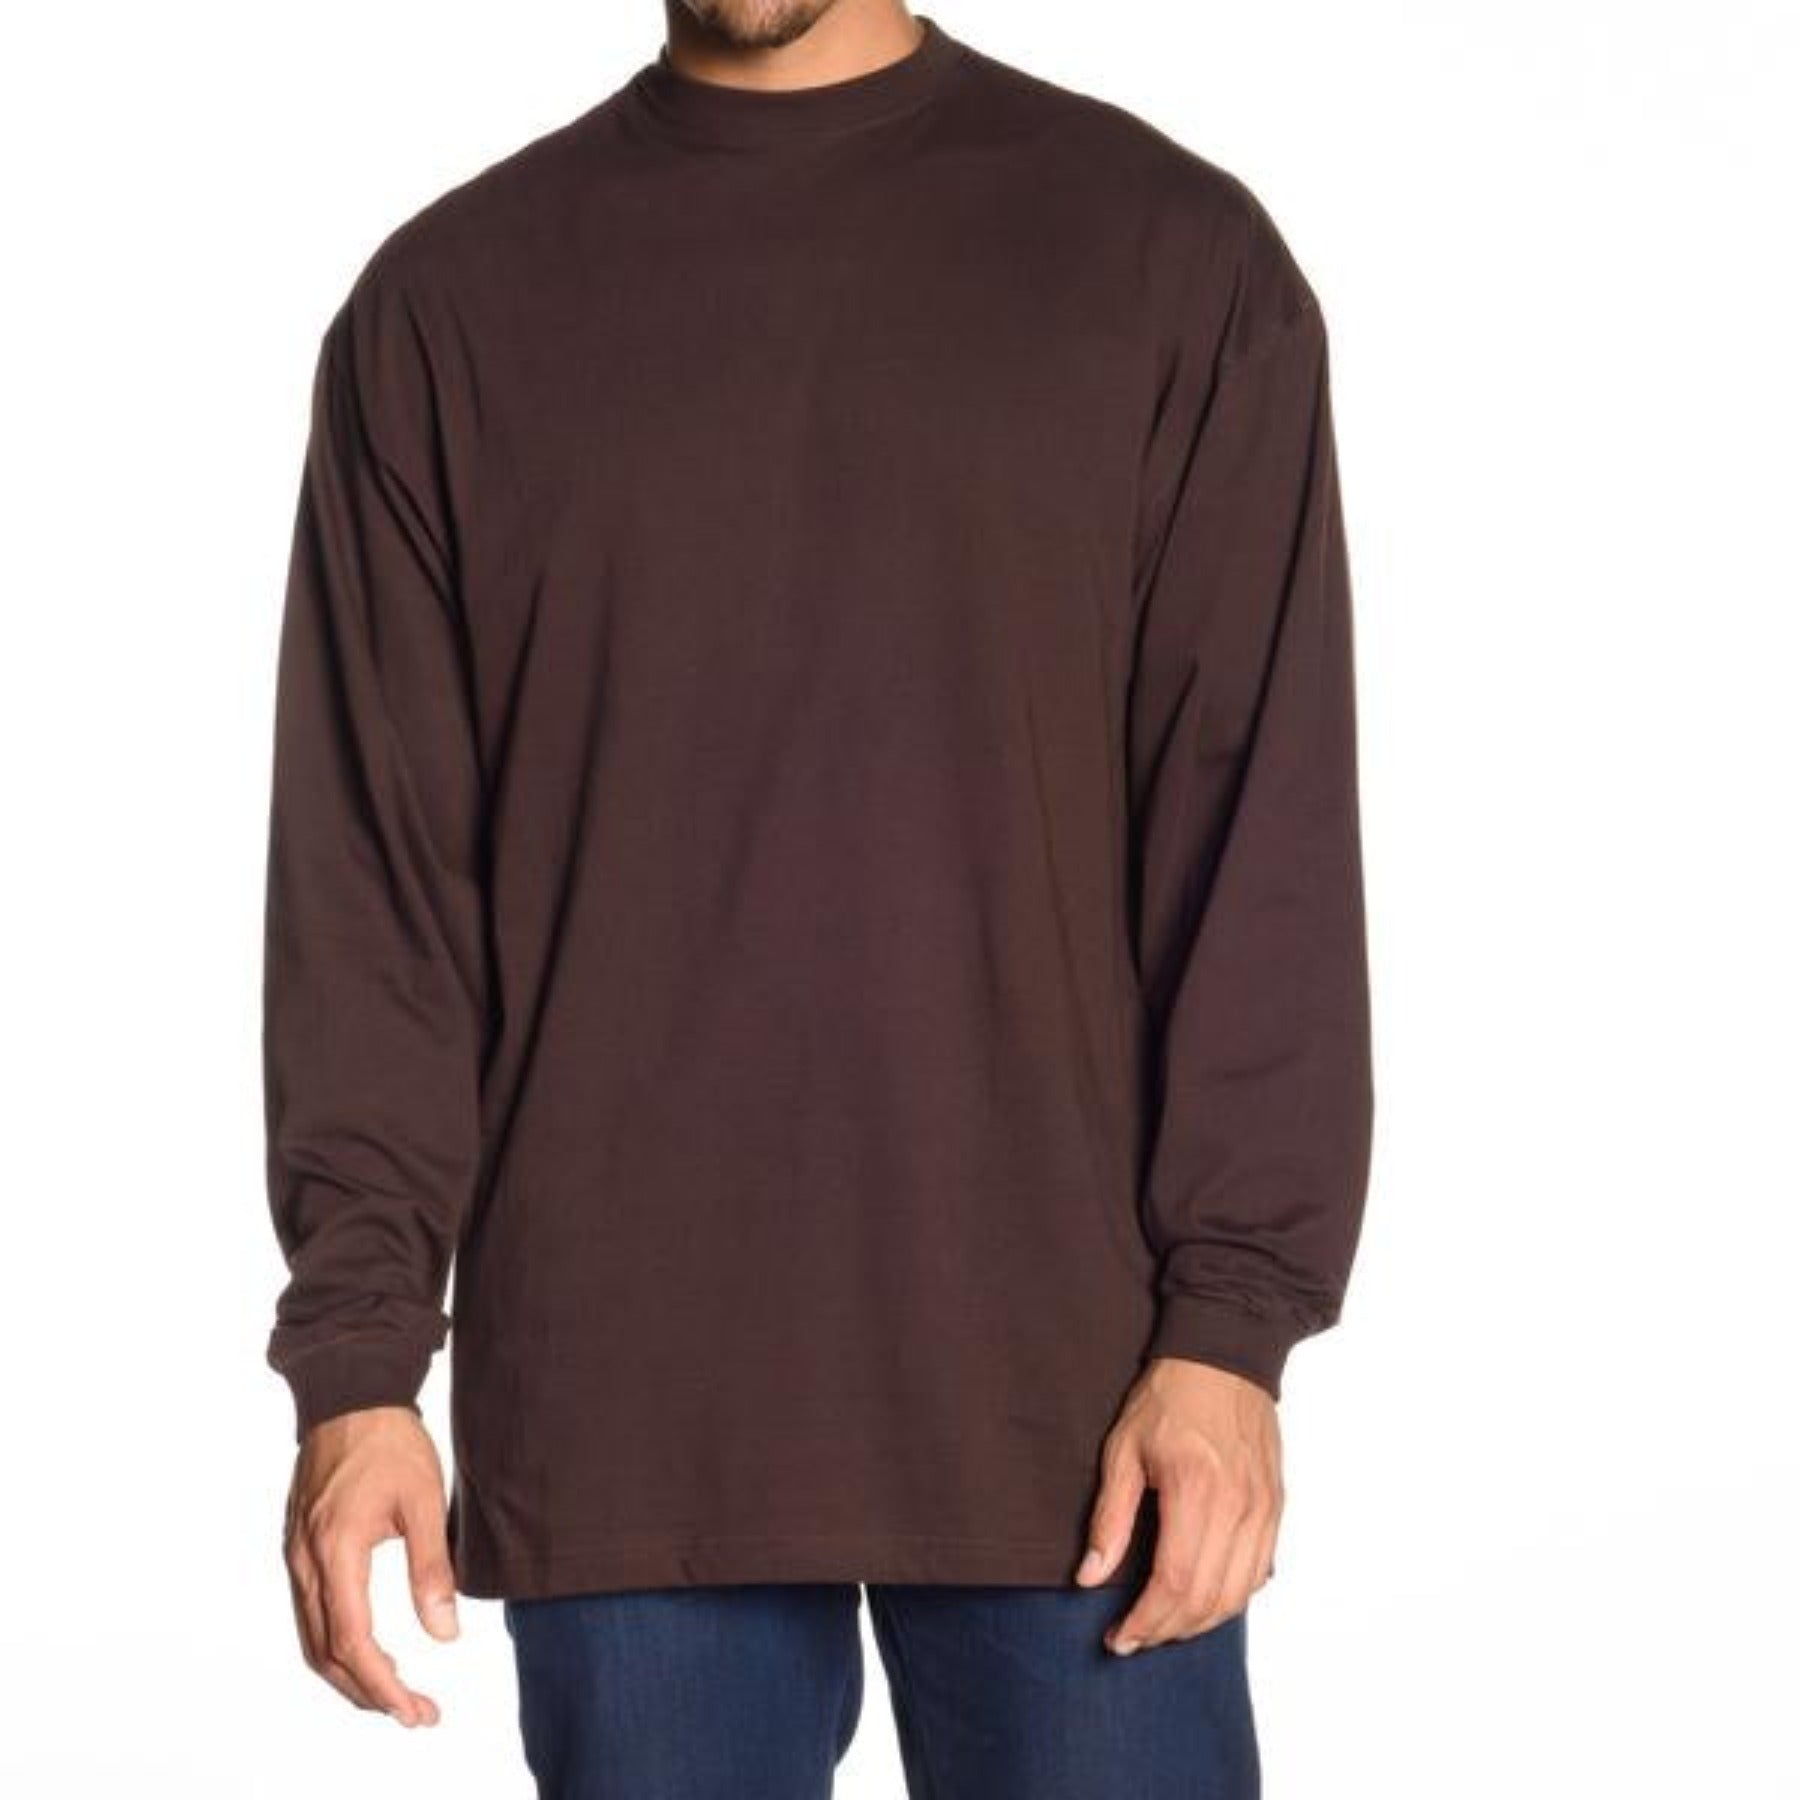 $5 Blow Out Classic Long Sleeves